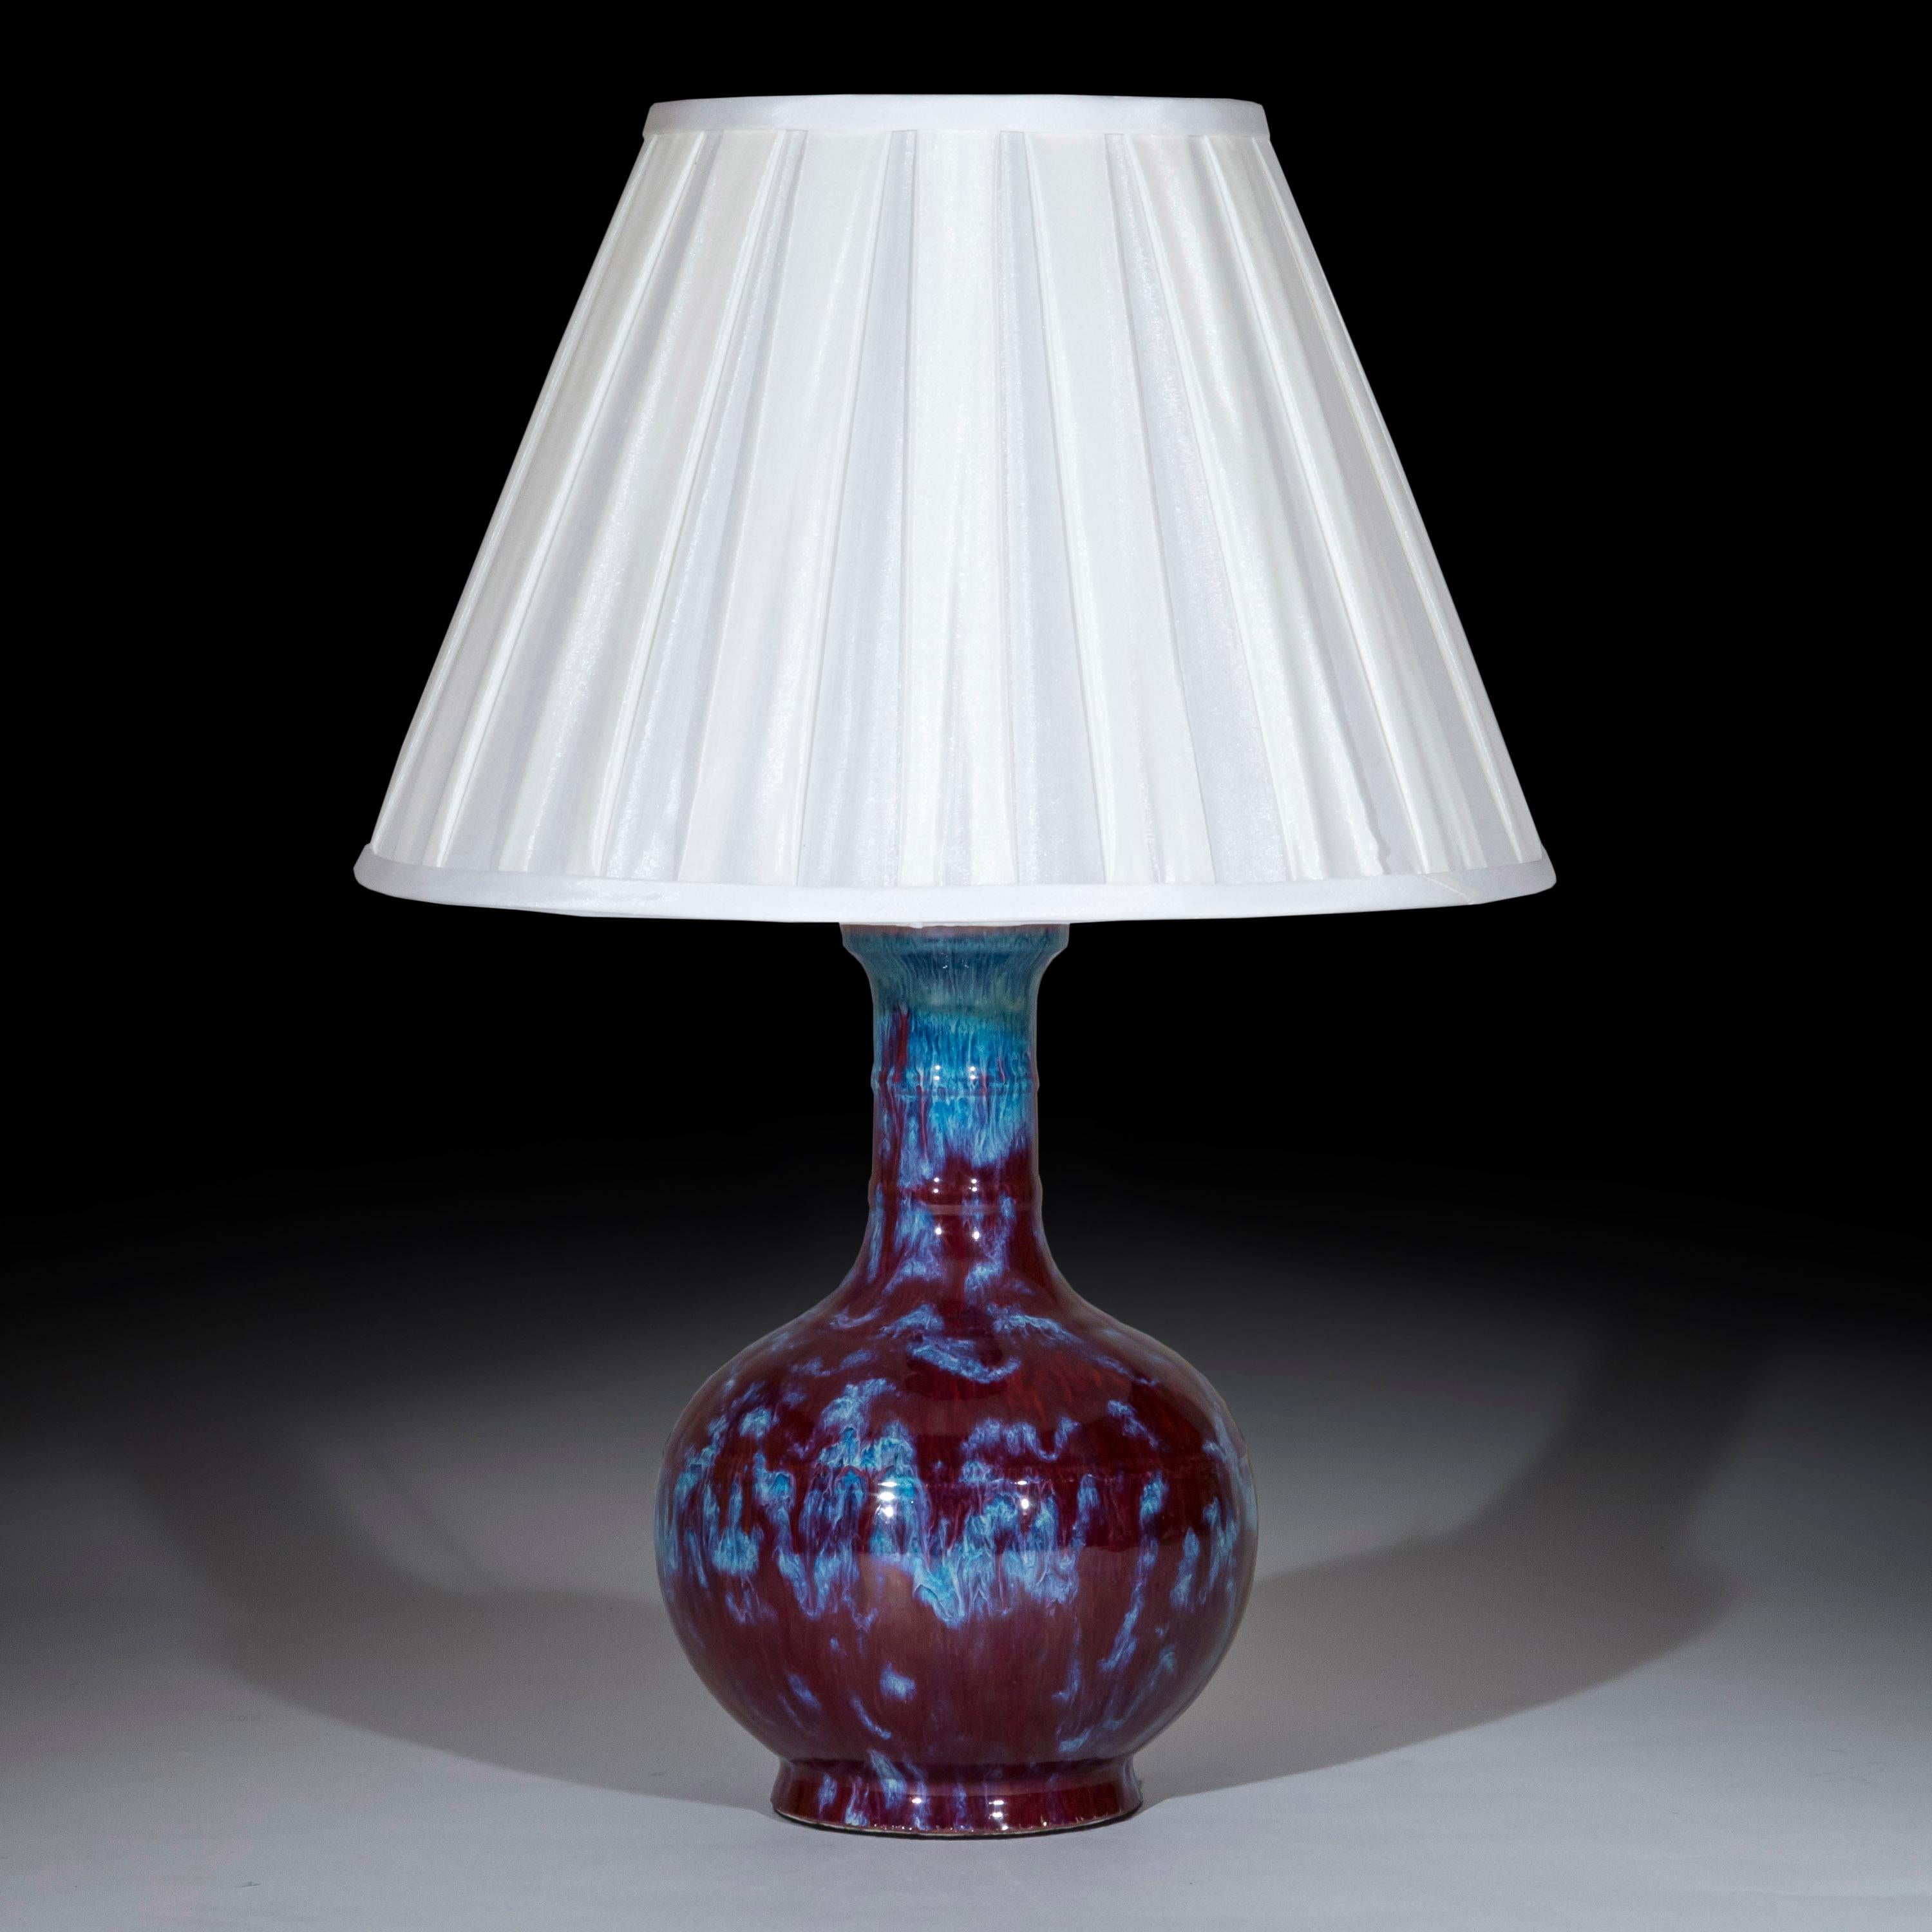 An absolutely superb, very decorative flambé glazed early 20th century pottery vase, mounted as table lamp
China, circa 1900s.

Why we like it
Its most beautifully contrasting blue and aubergine colored flambe glazing make this bottle vase a